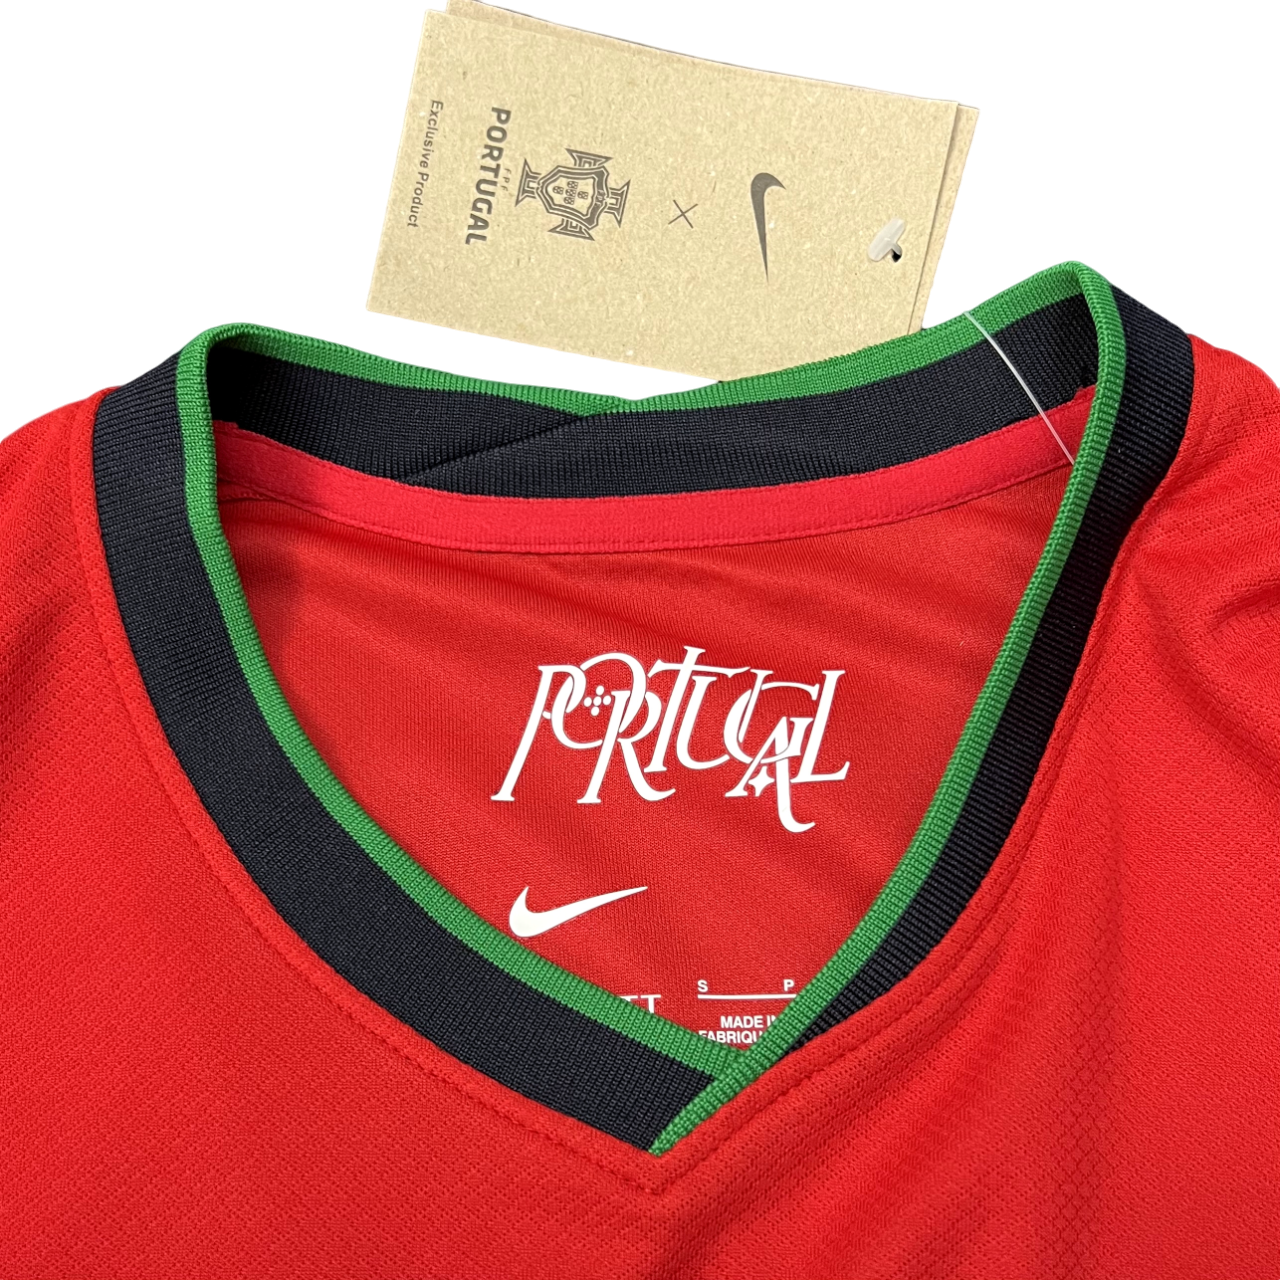 Portugal Home Jersey -24/25